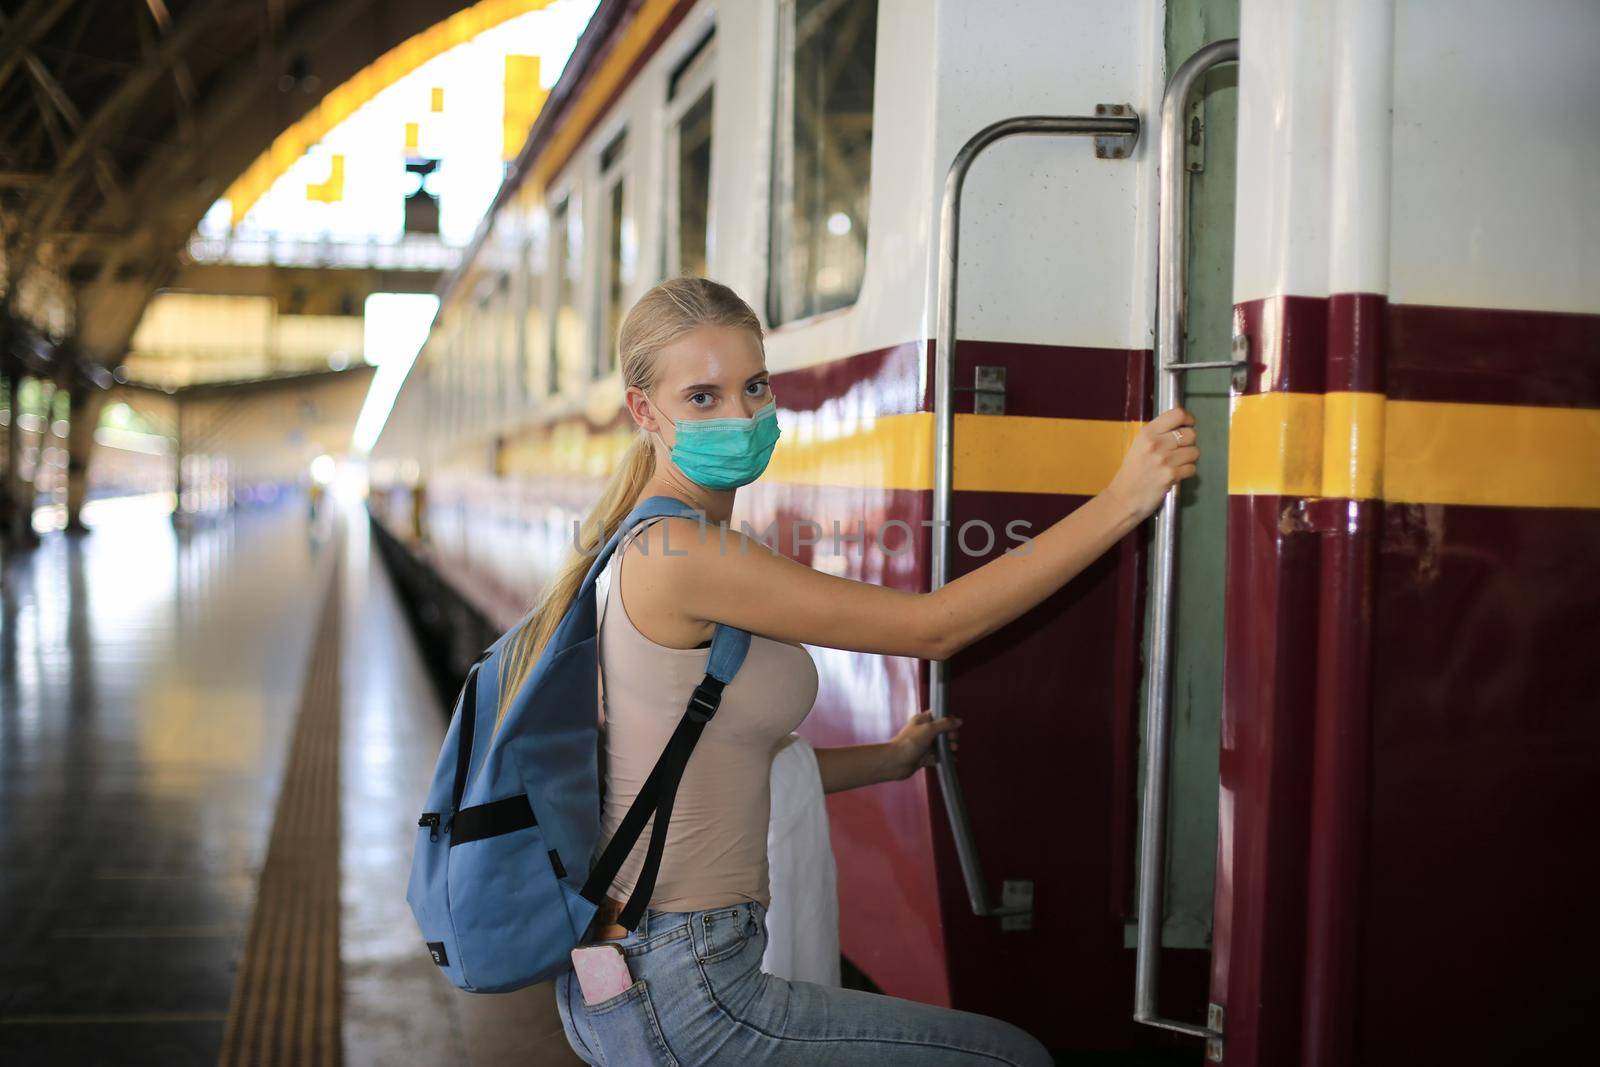 young woman with face mask waiting in vintage train, relaxed and carefree at the station platform in Bangkok, Thailand before catching a train. Travel photography. Lifestyle.